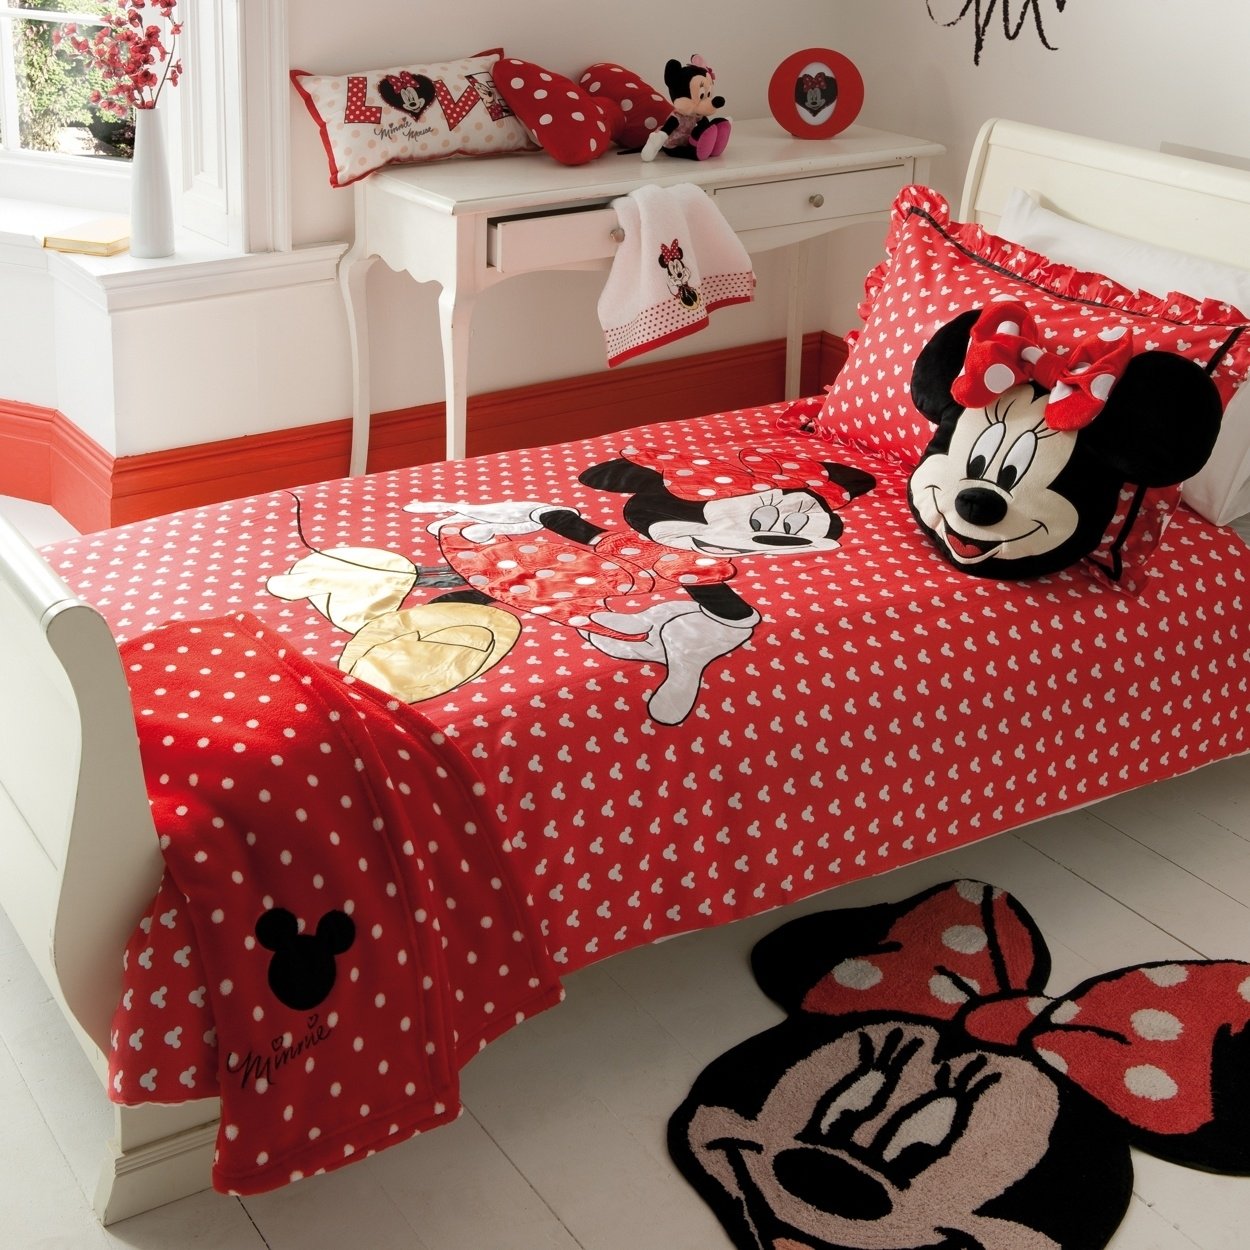 10 Great Minnie Mouse Room Decorating Ideas mickey mouse theme bedsheet rug for girl bedroom decor craze 2023